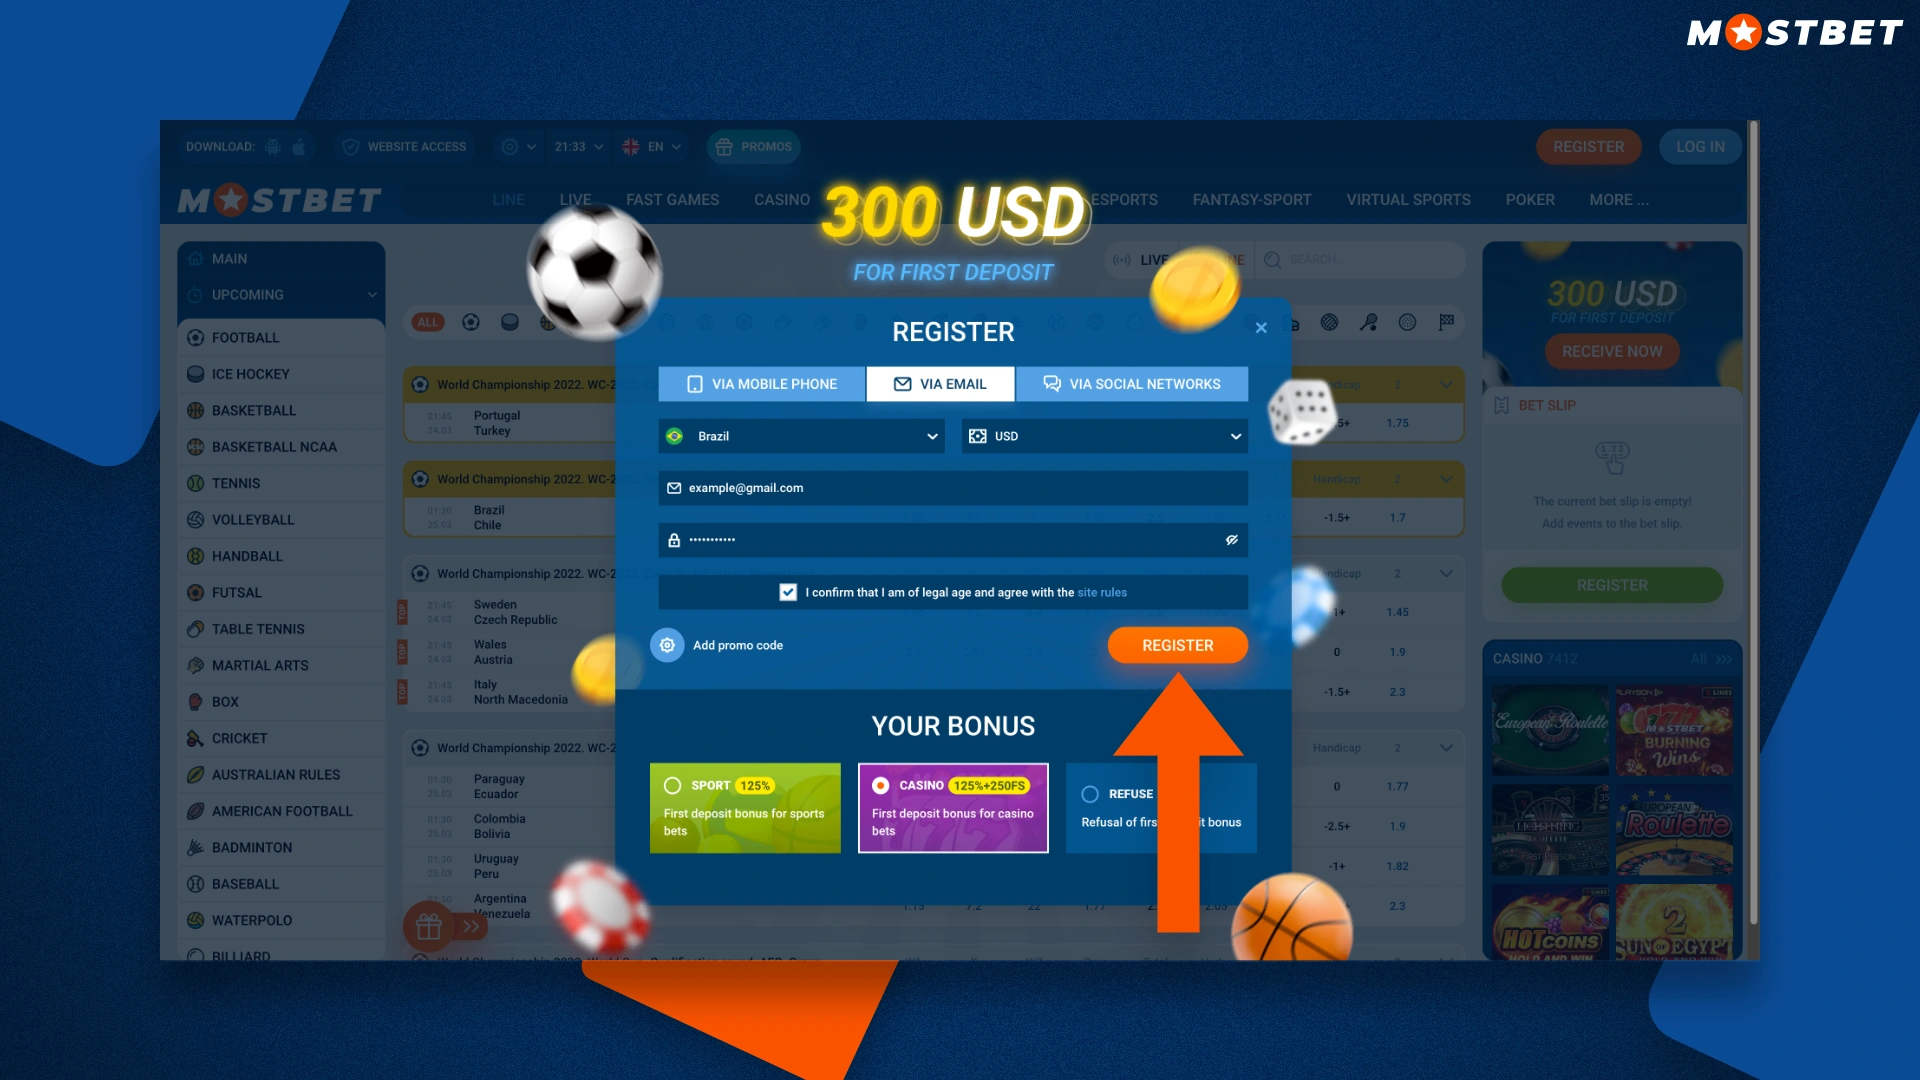 Complete the registration process at mostbet